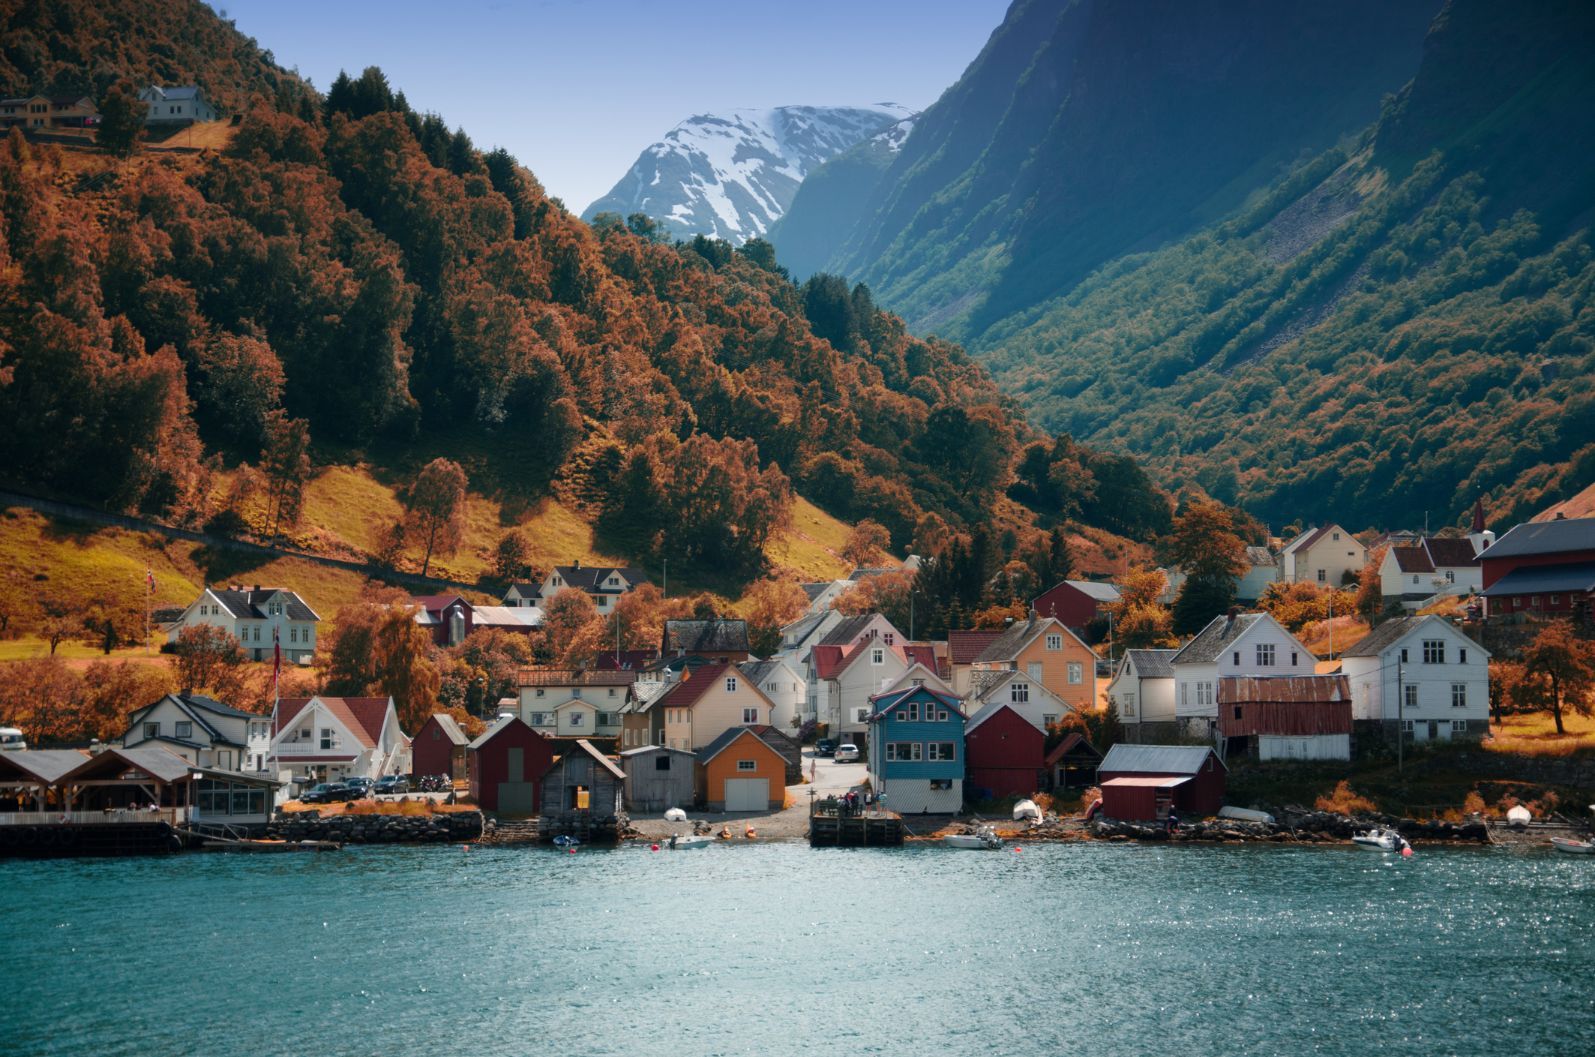 The tiny fjord town of Undreda, where we finish our kayaking adventure